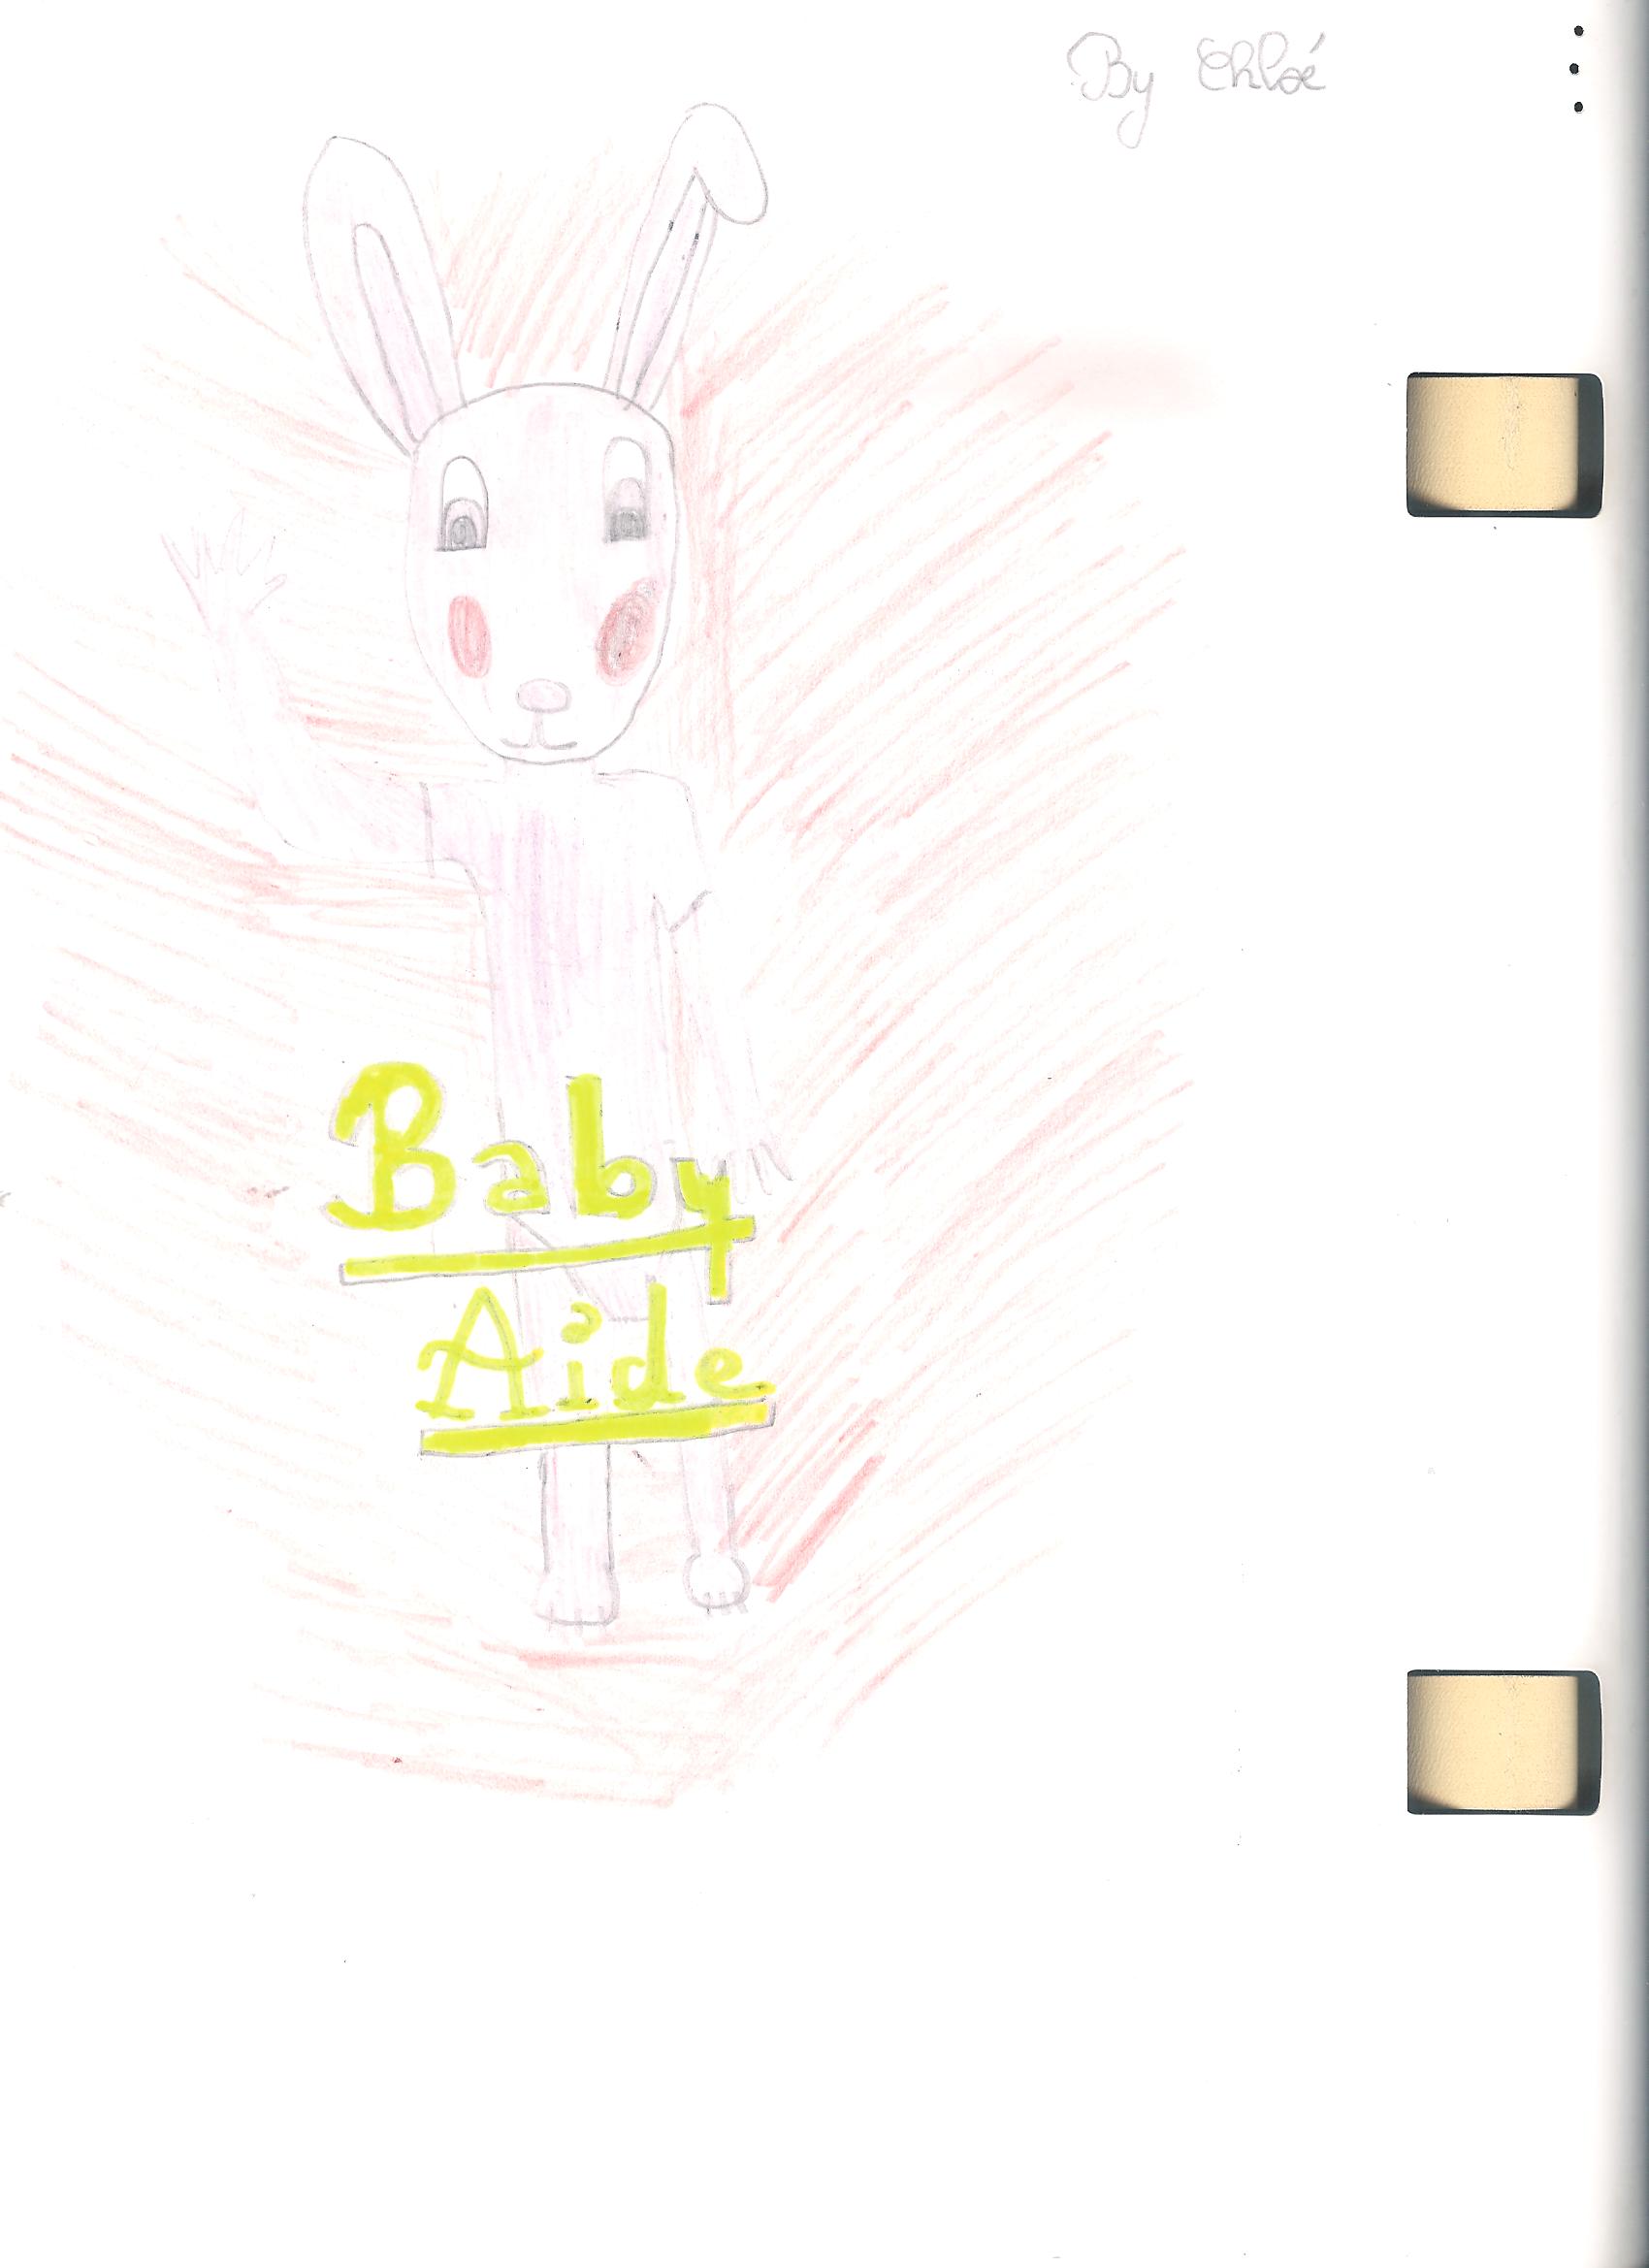 Ma galerie Baby-a11